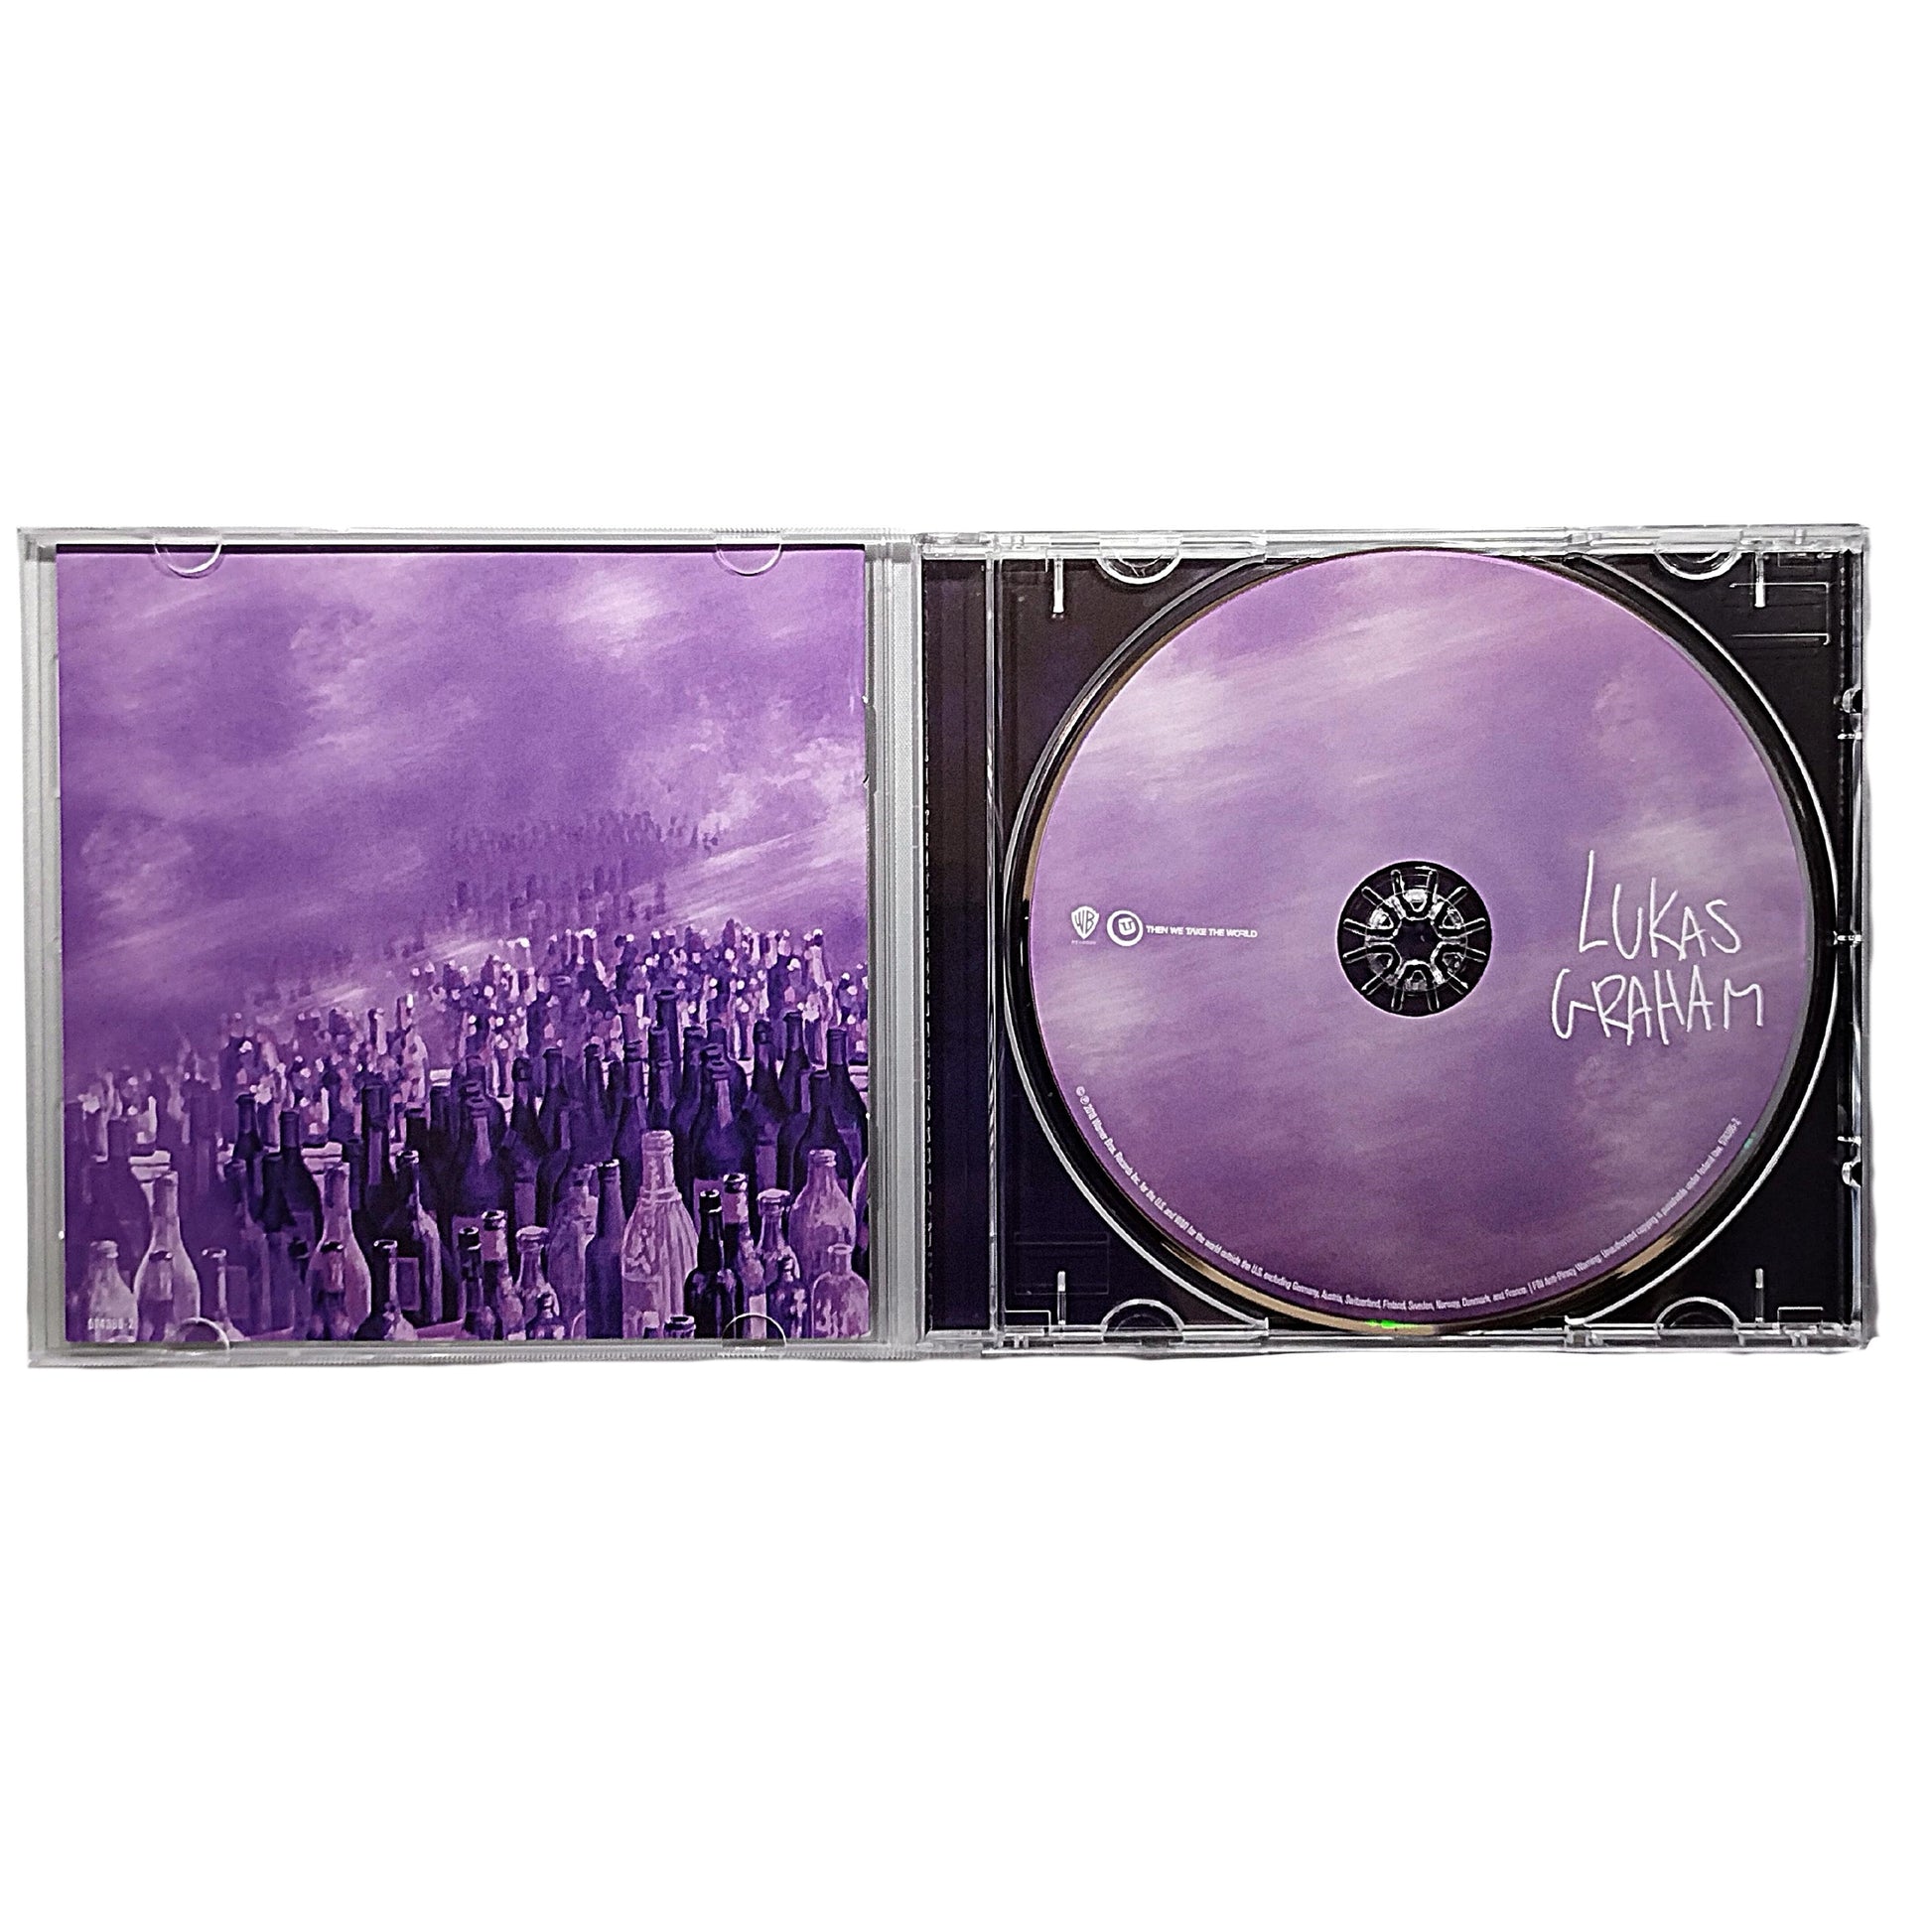 Music- Autographed- Lukas Graham Signed 3 The Purple Album Compact Disc with CD Cover- Beckett BAS Authentication - 504